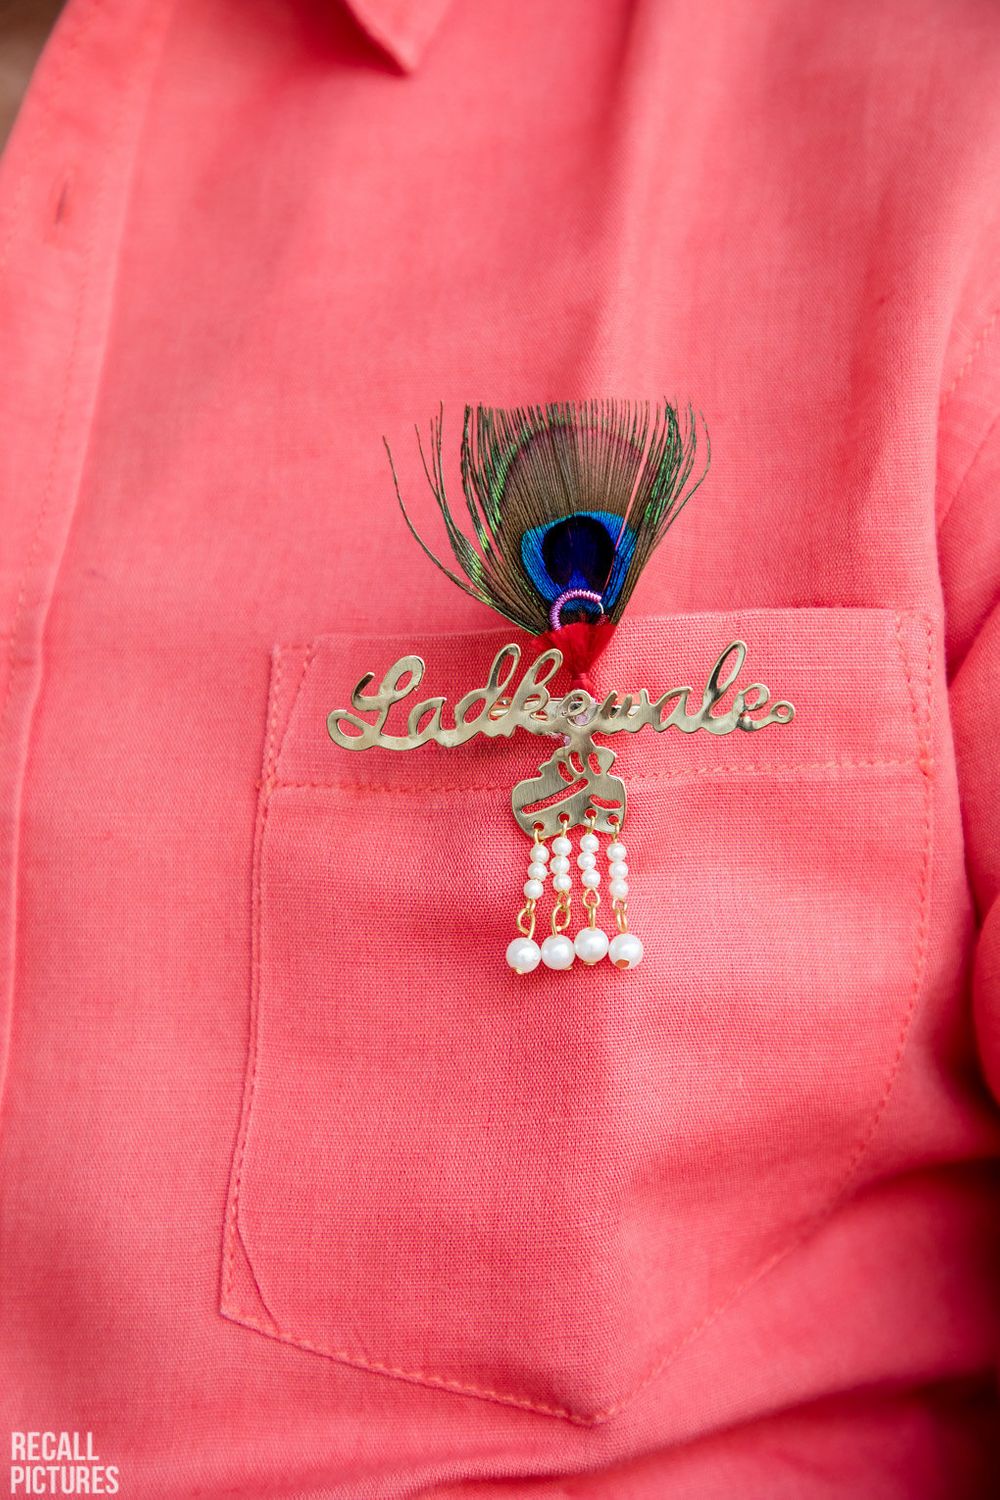 Photo of Ladkewale badges and brooch for girls or boys side